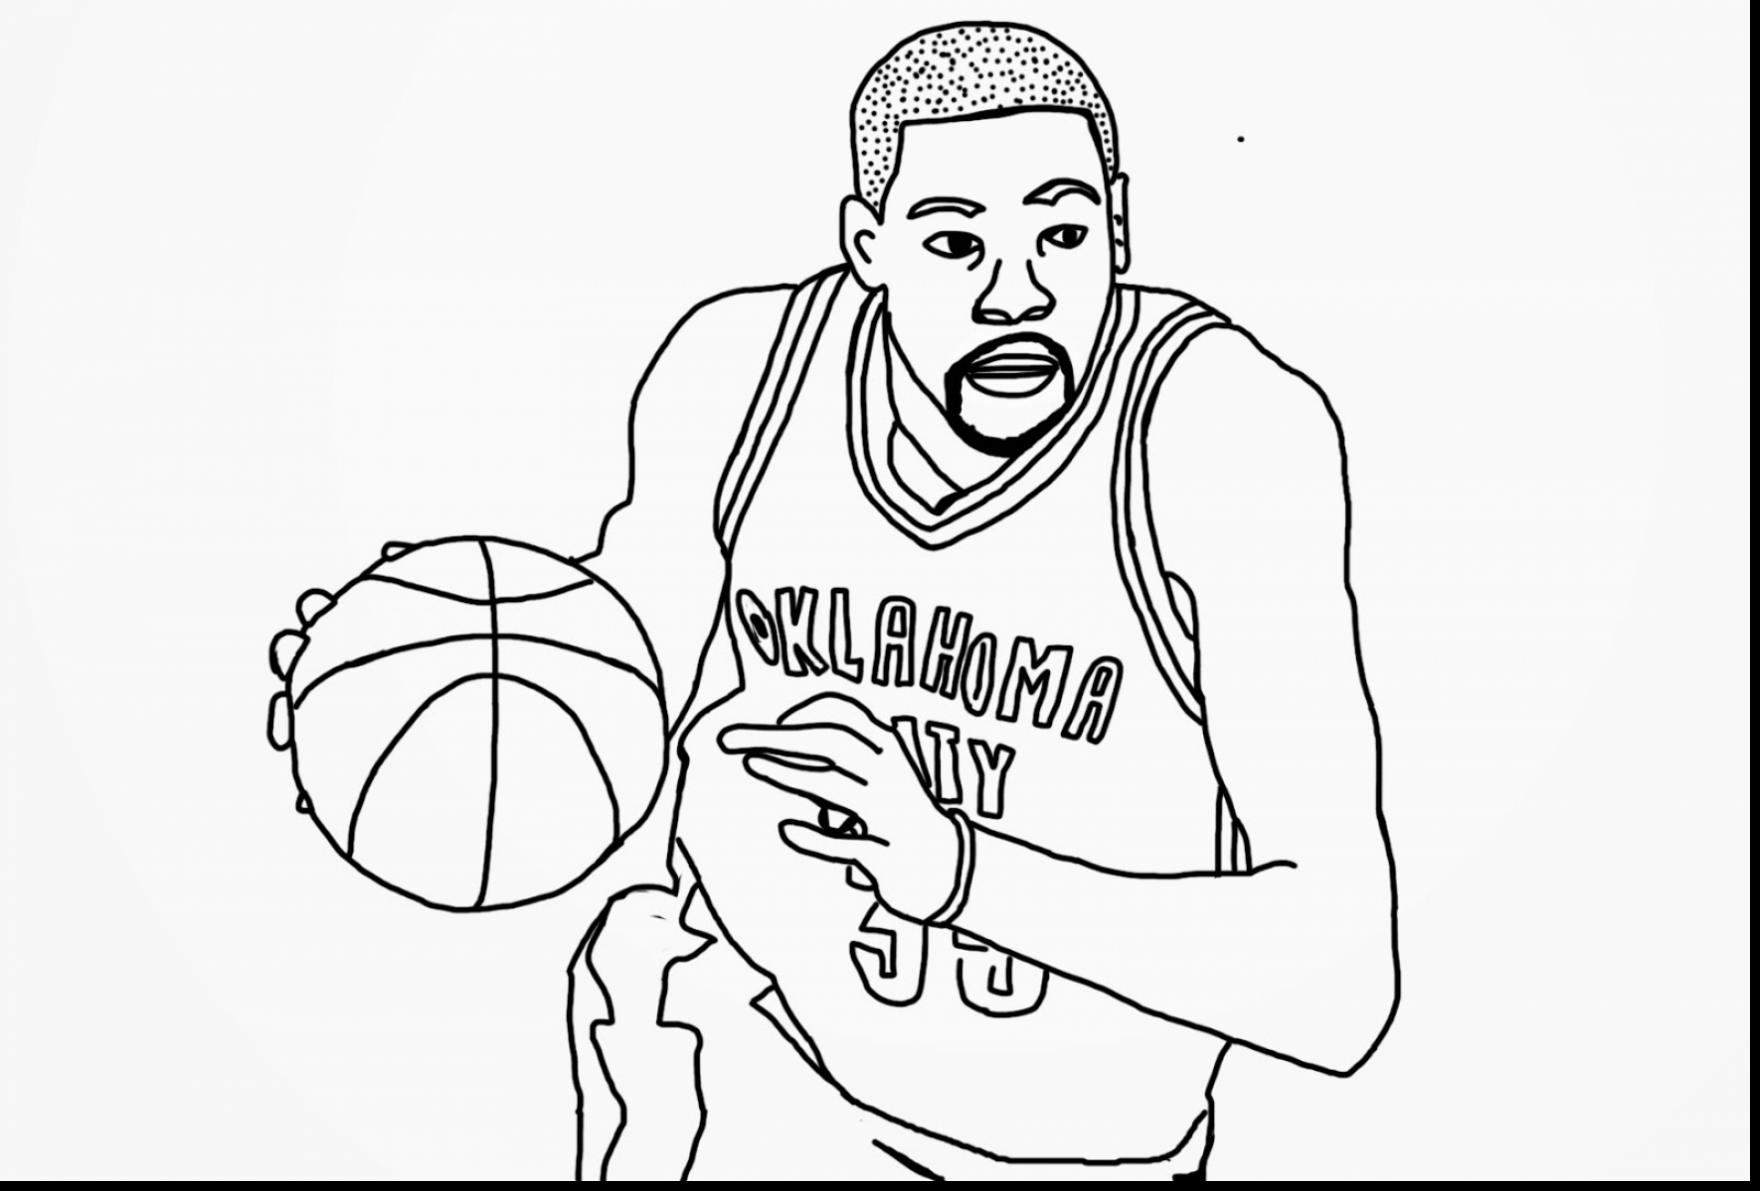 Basketball Player Coloring Pages at GetColorings.com | Free printable ...